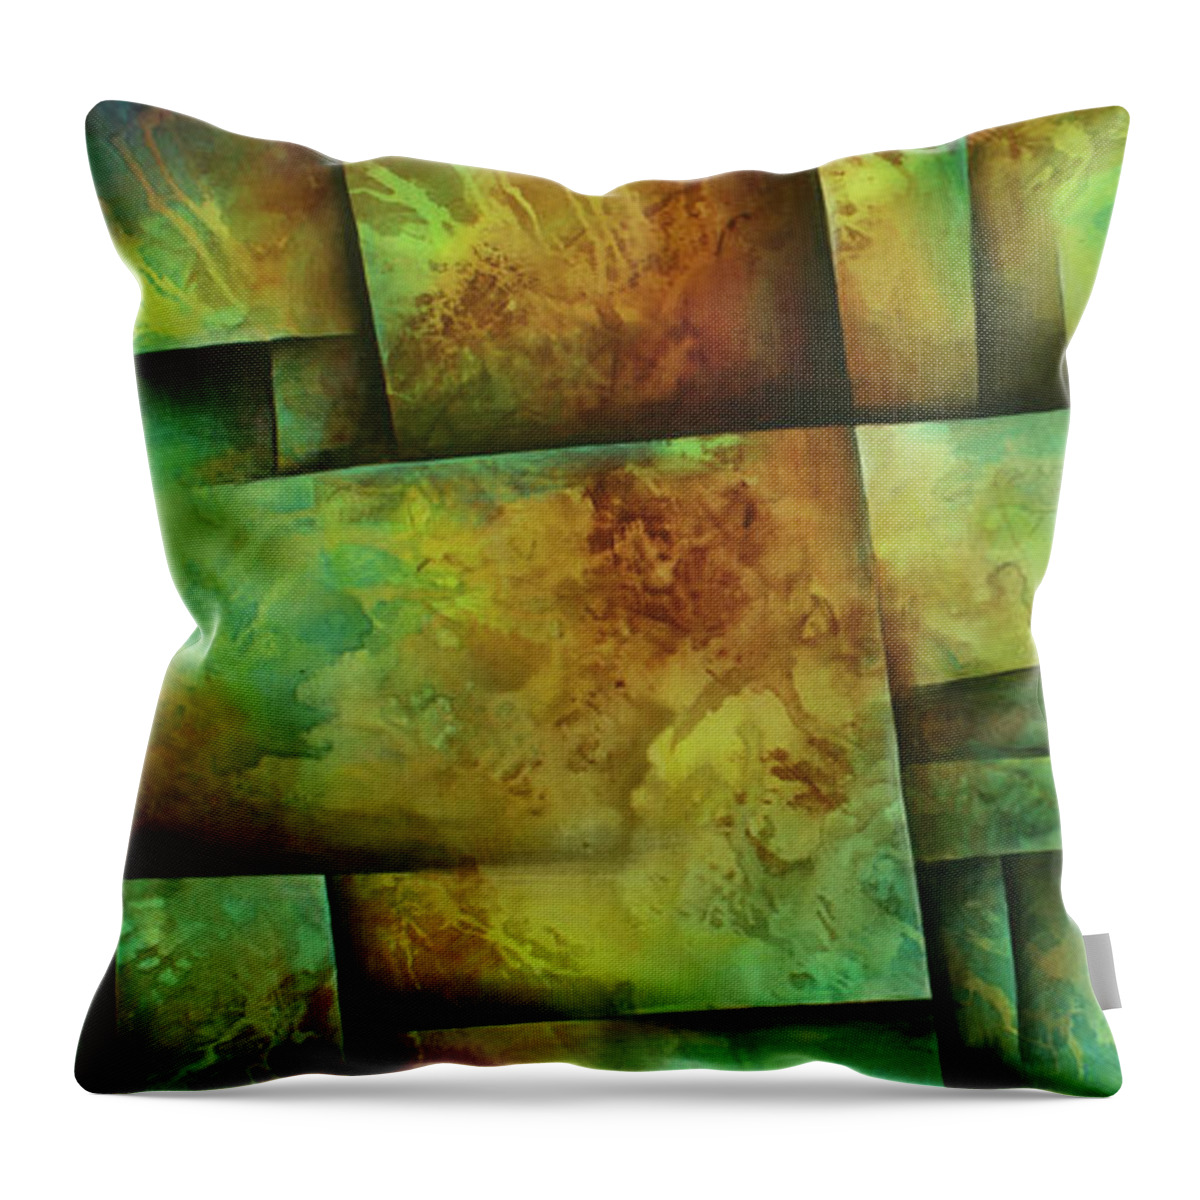  Throw Pillow featuring the painting Flowers 7 by Michael Lang